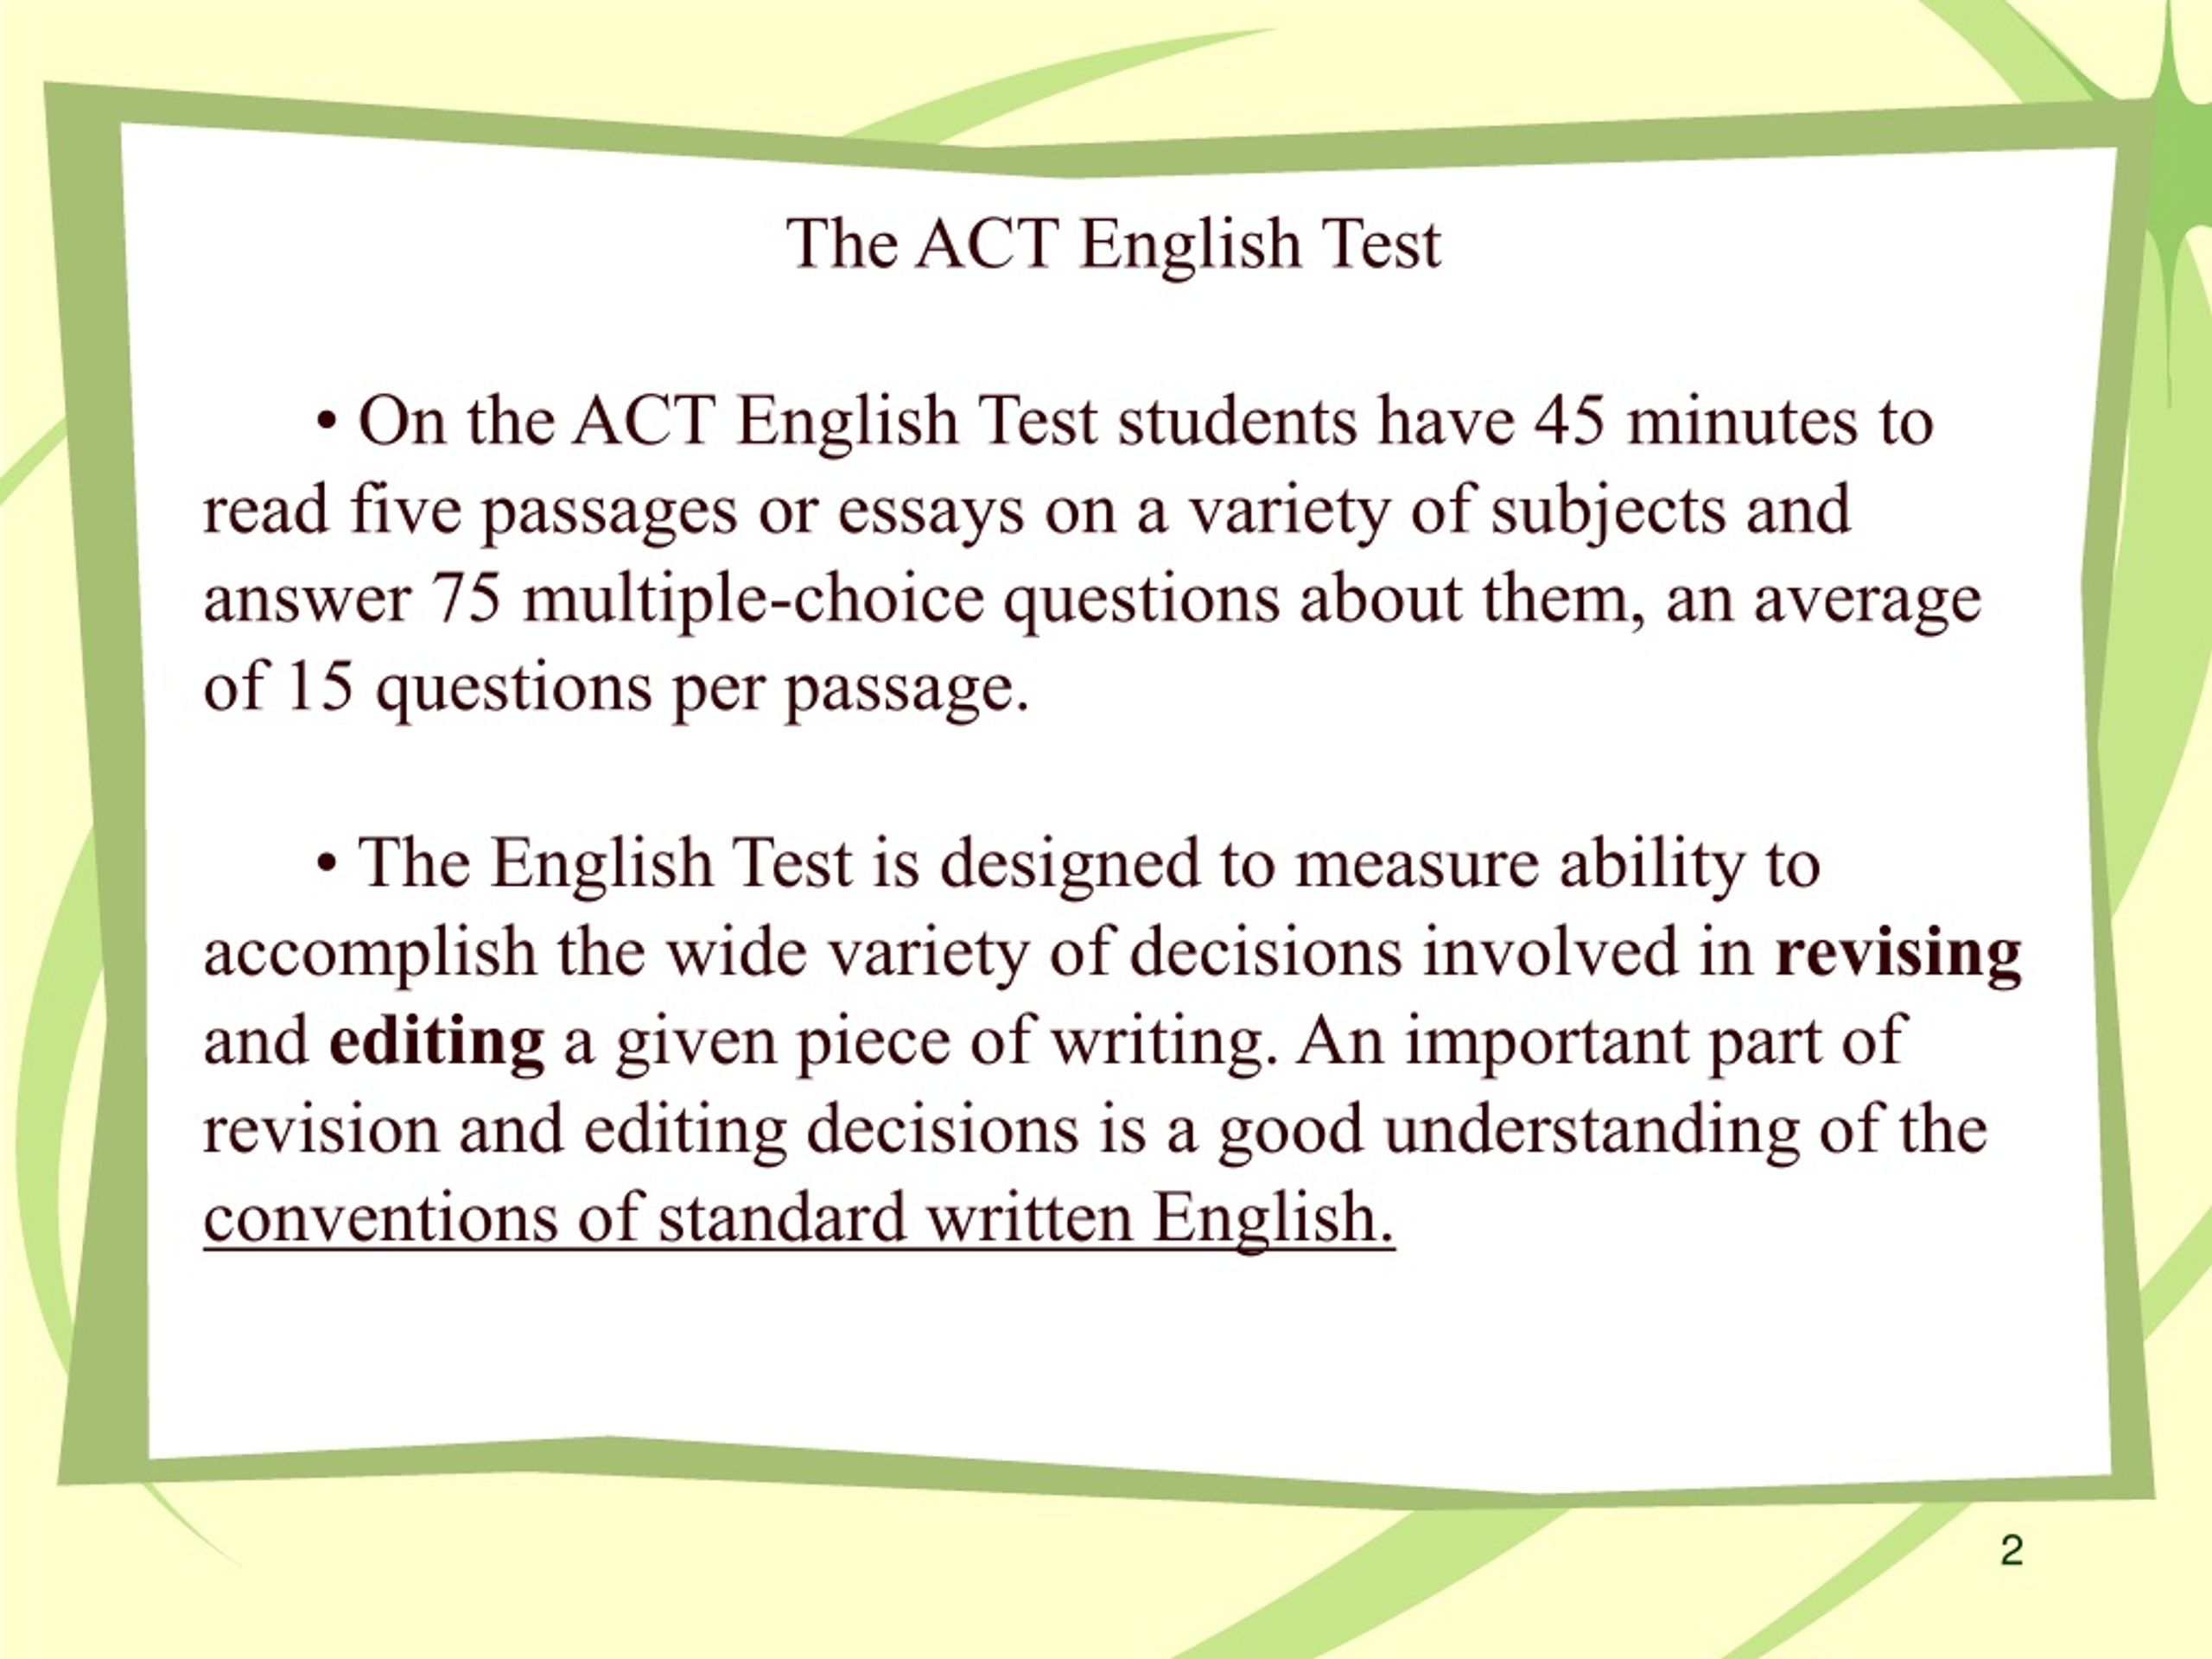 ppt-about-the-act-english-test-powerpoint-presentation-free-download-id-328877